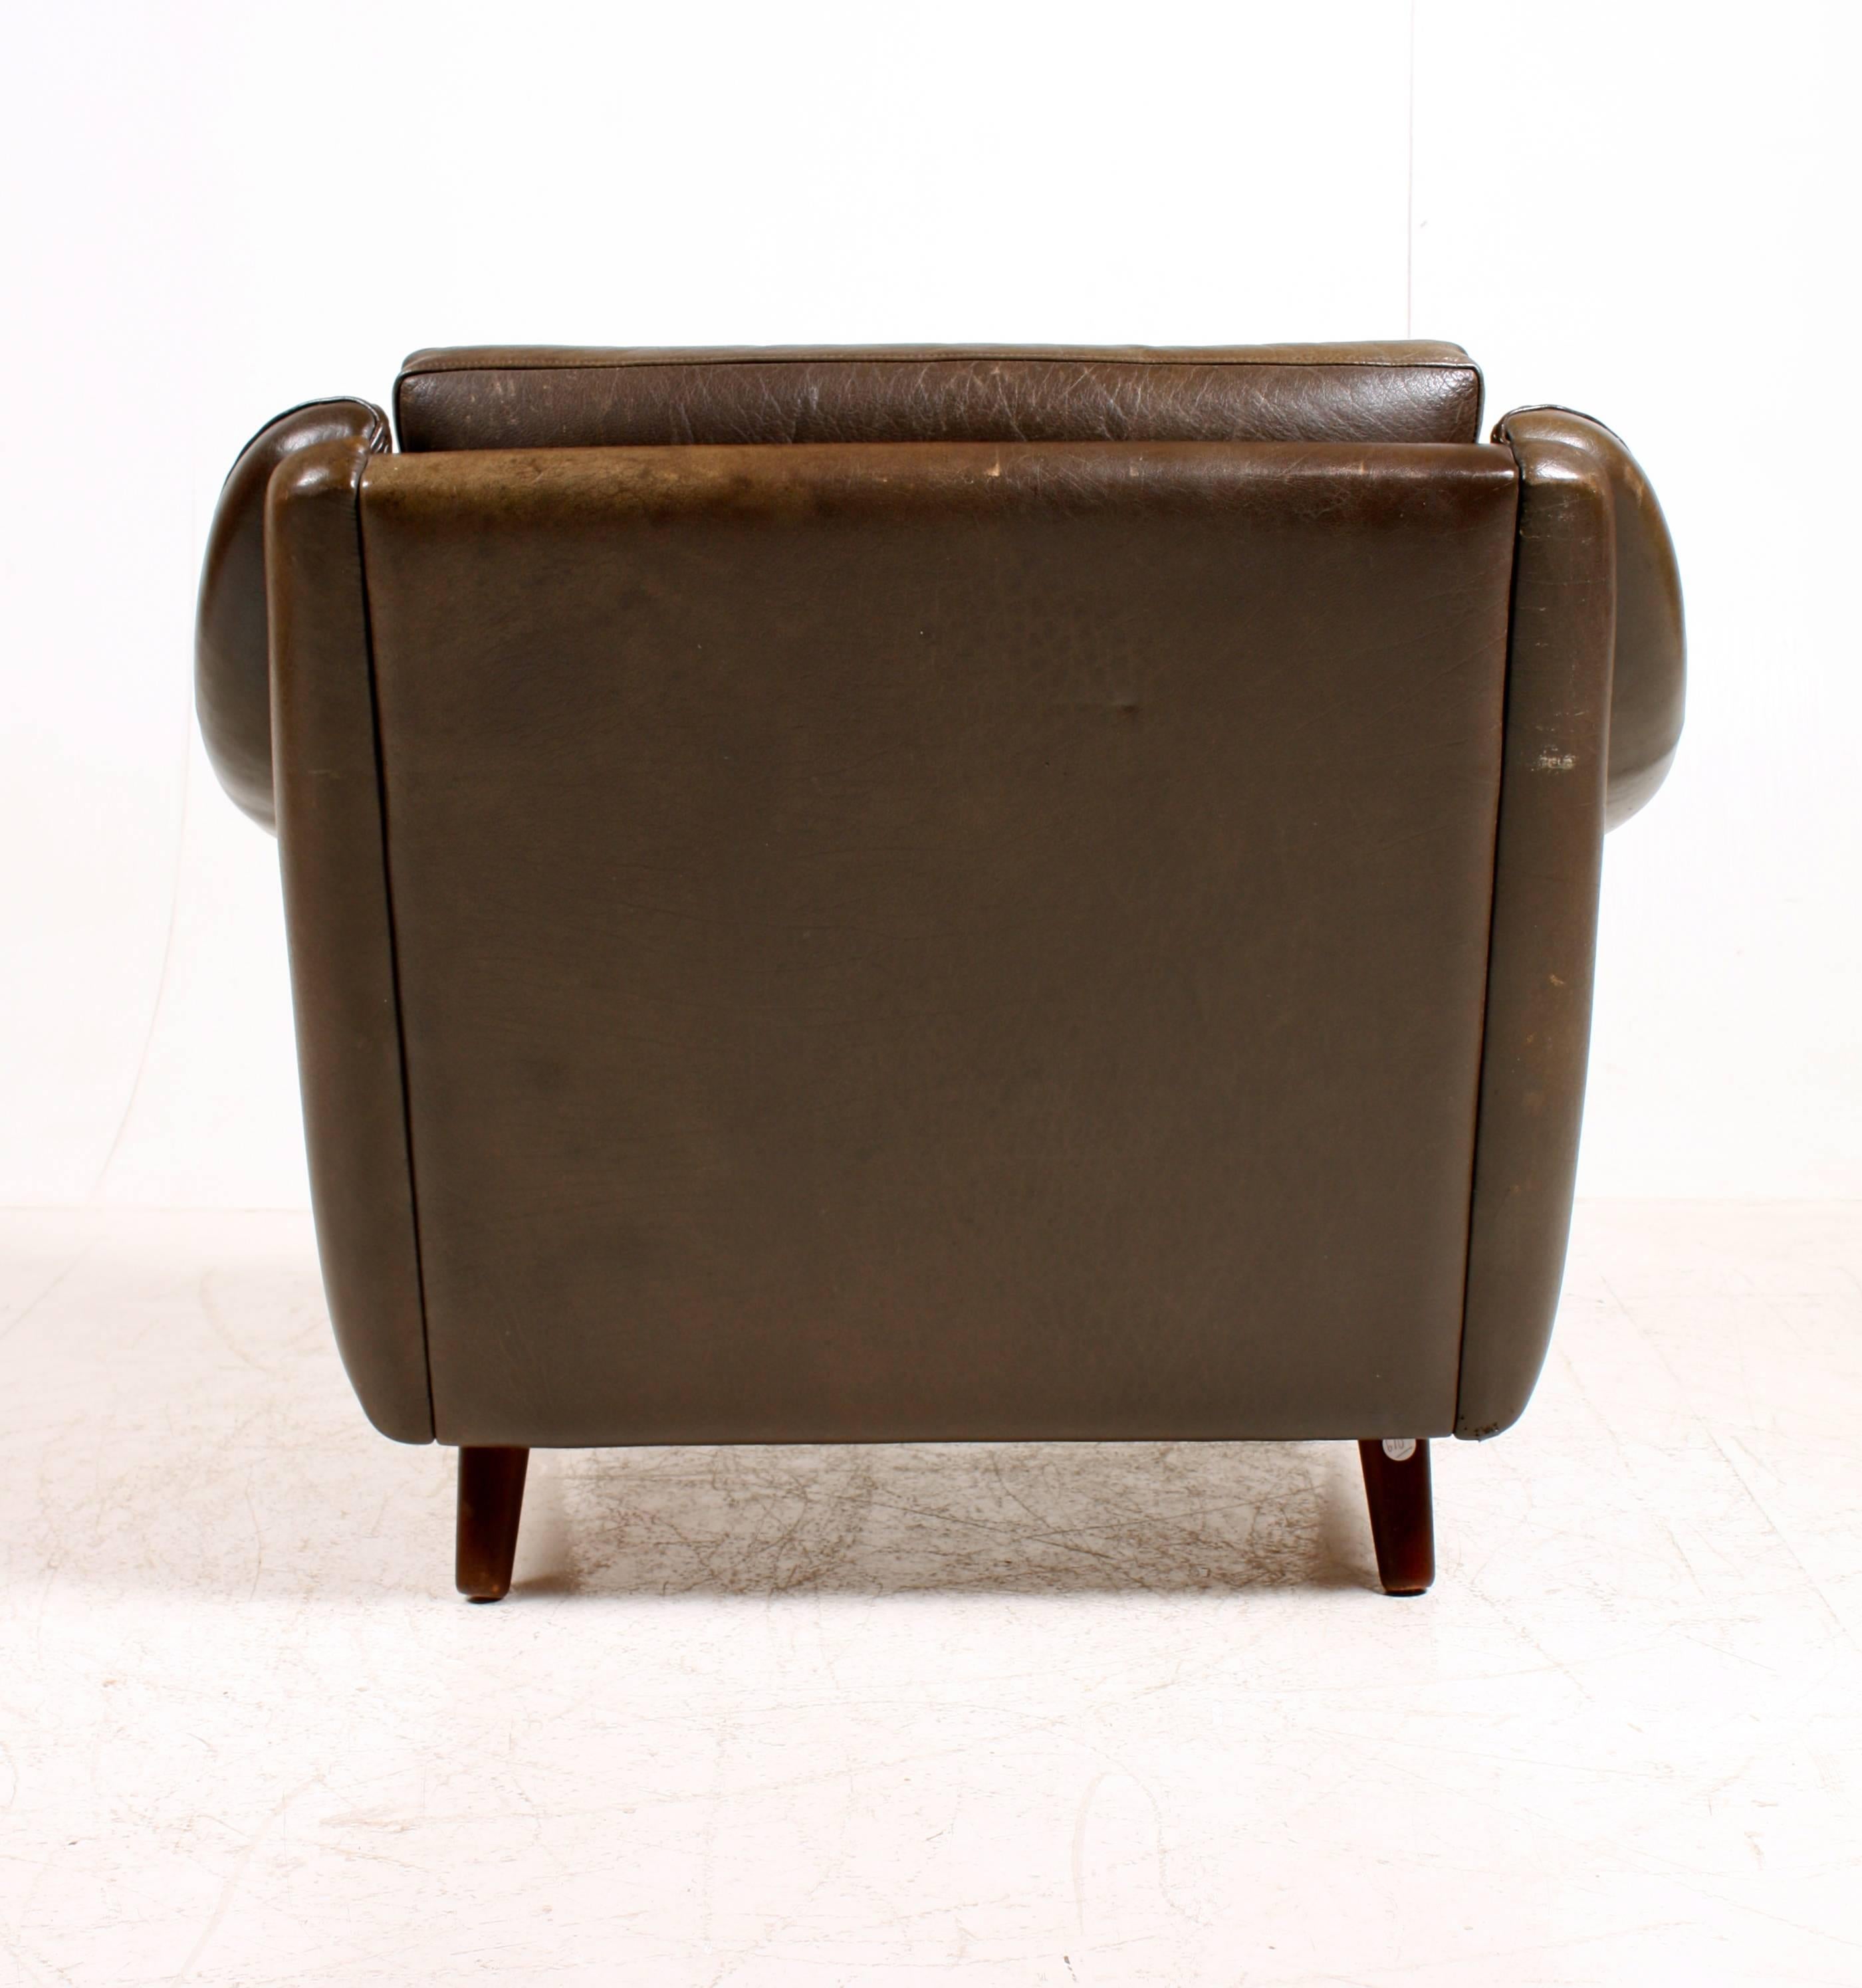 Great looking and very comfortable 1960's lounge chair in patinated leather. Designed by Maa. Aage Christensen and produced in Denmark by Erhadsen & Andersen. Original condition.